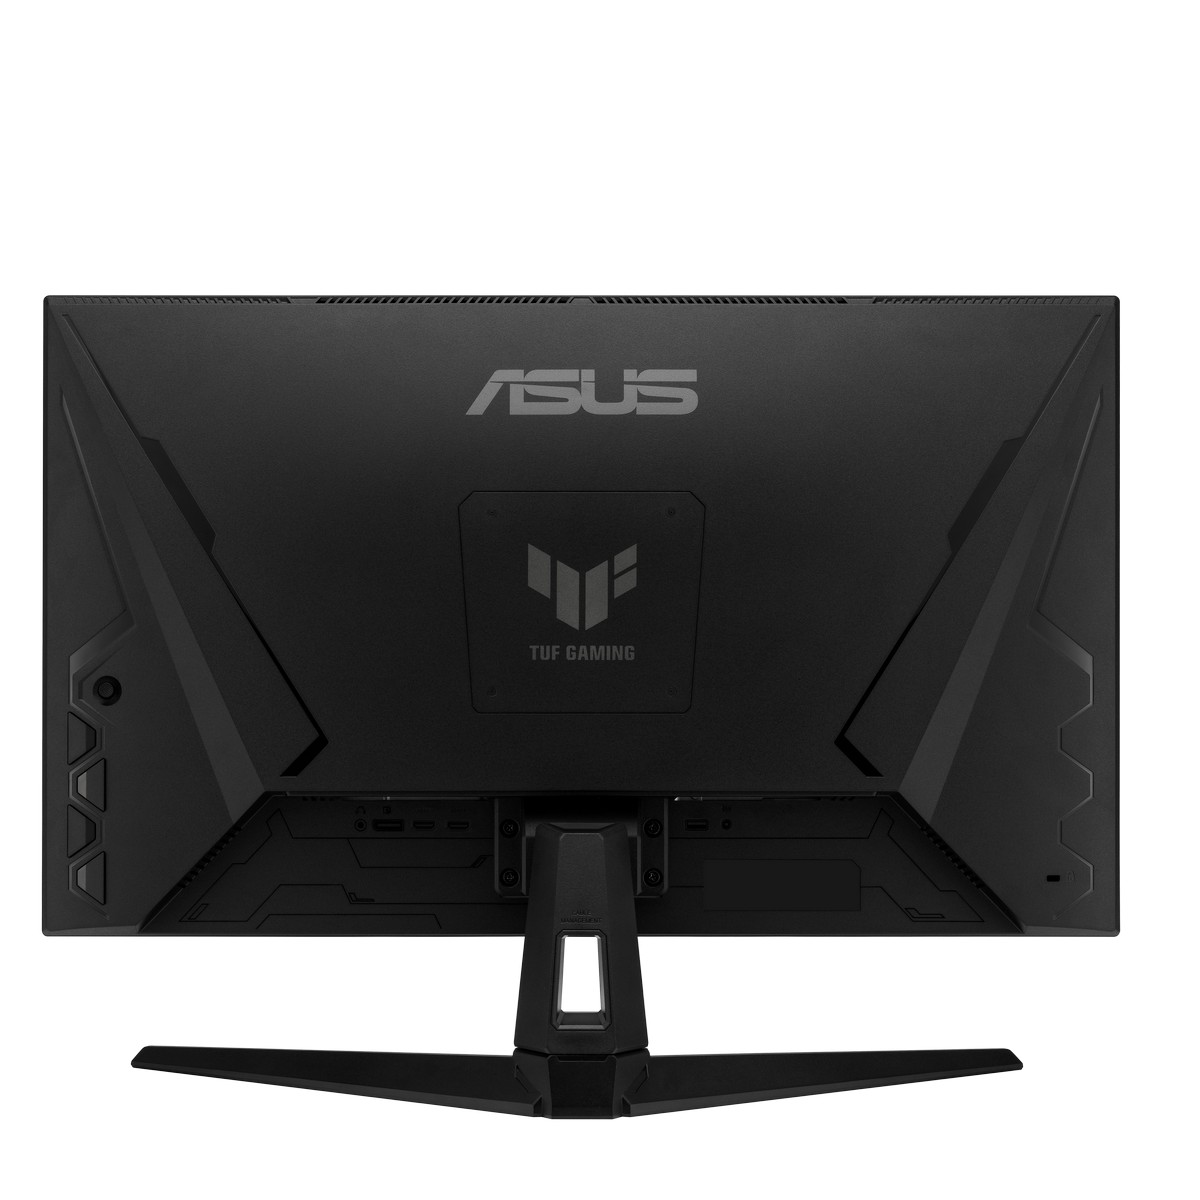 Asus - ASUS 27" VG27AQ3A 2560x1440 IPS 180Hz A-Sync Widescreen Gaming Monitor